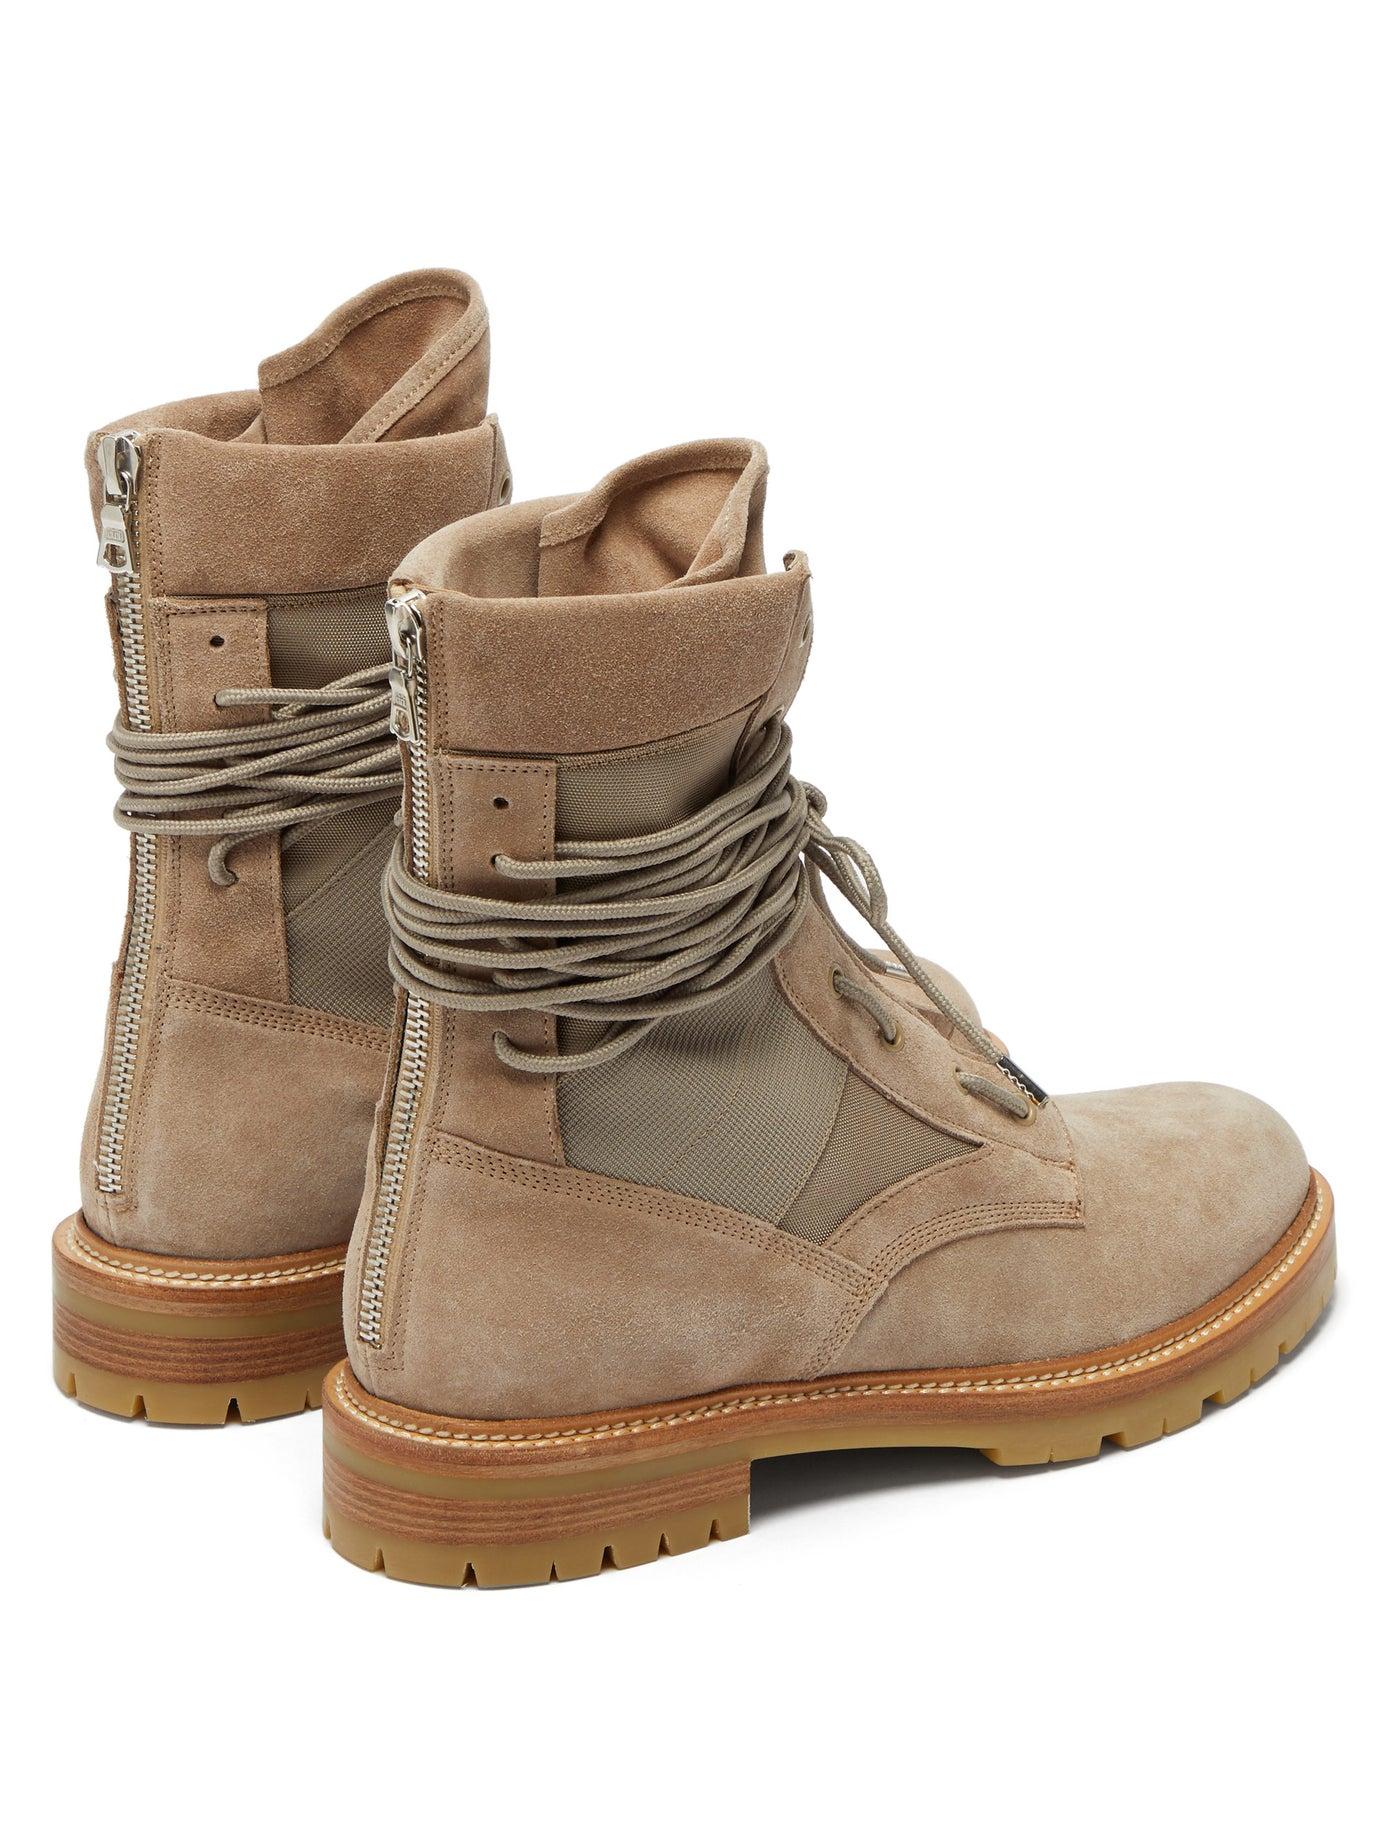 Amiri Suede And Canvas Combat Boots in Beige (Natural) for Men - Lyst